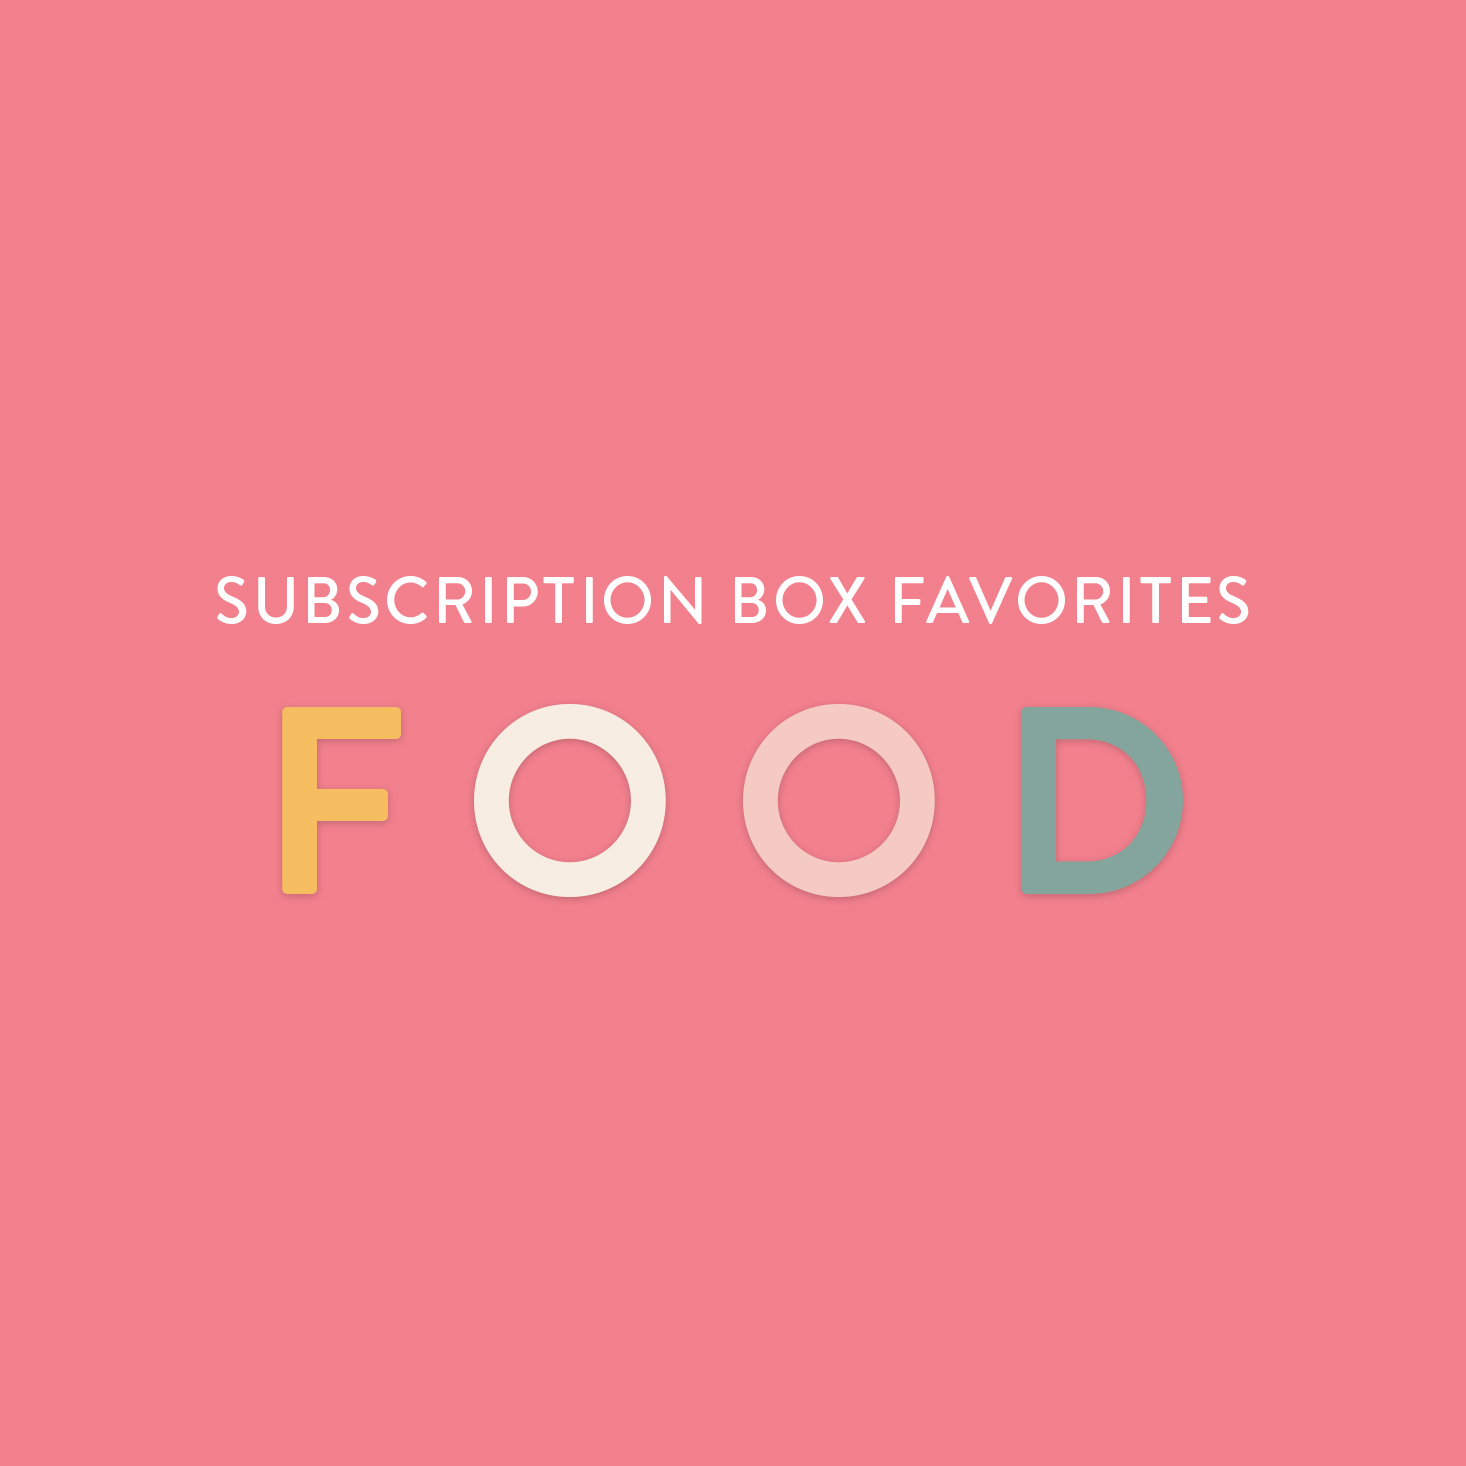 Our Subscription Box FOOD Favorites for July 2020!